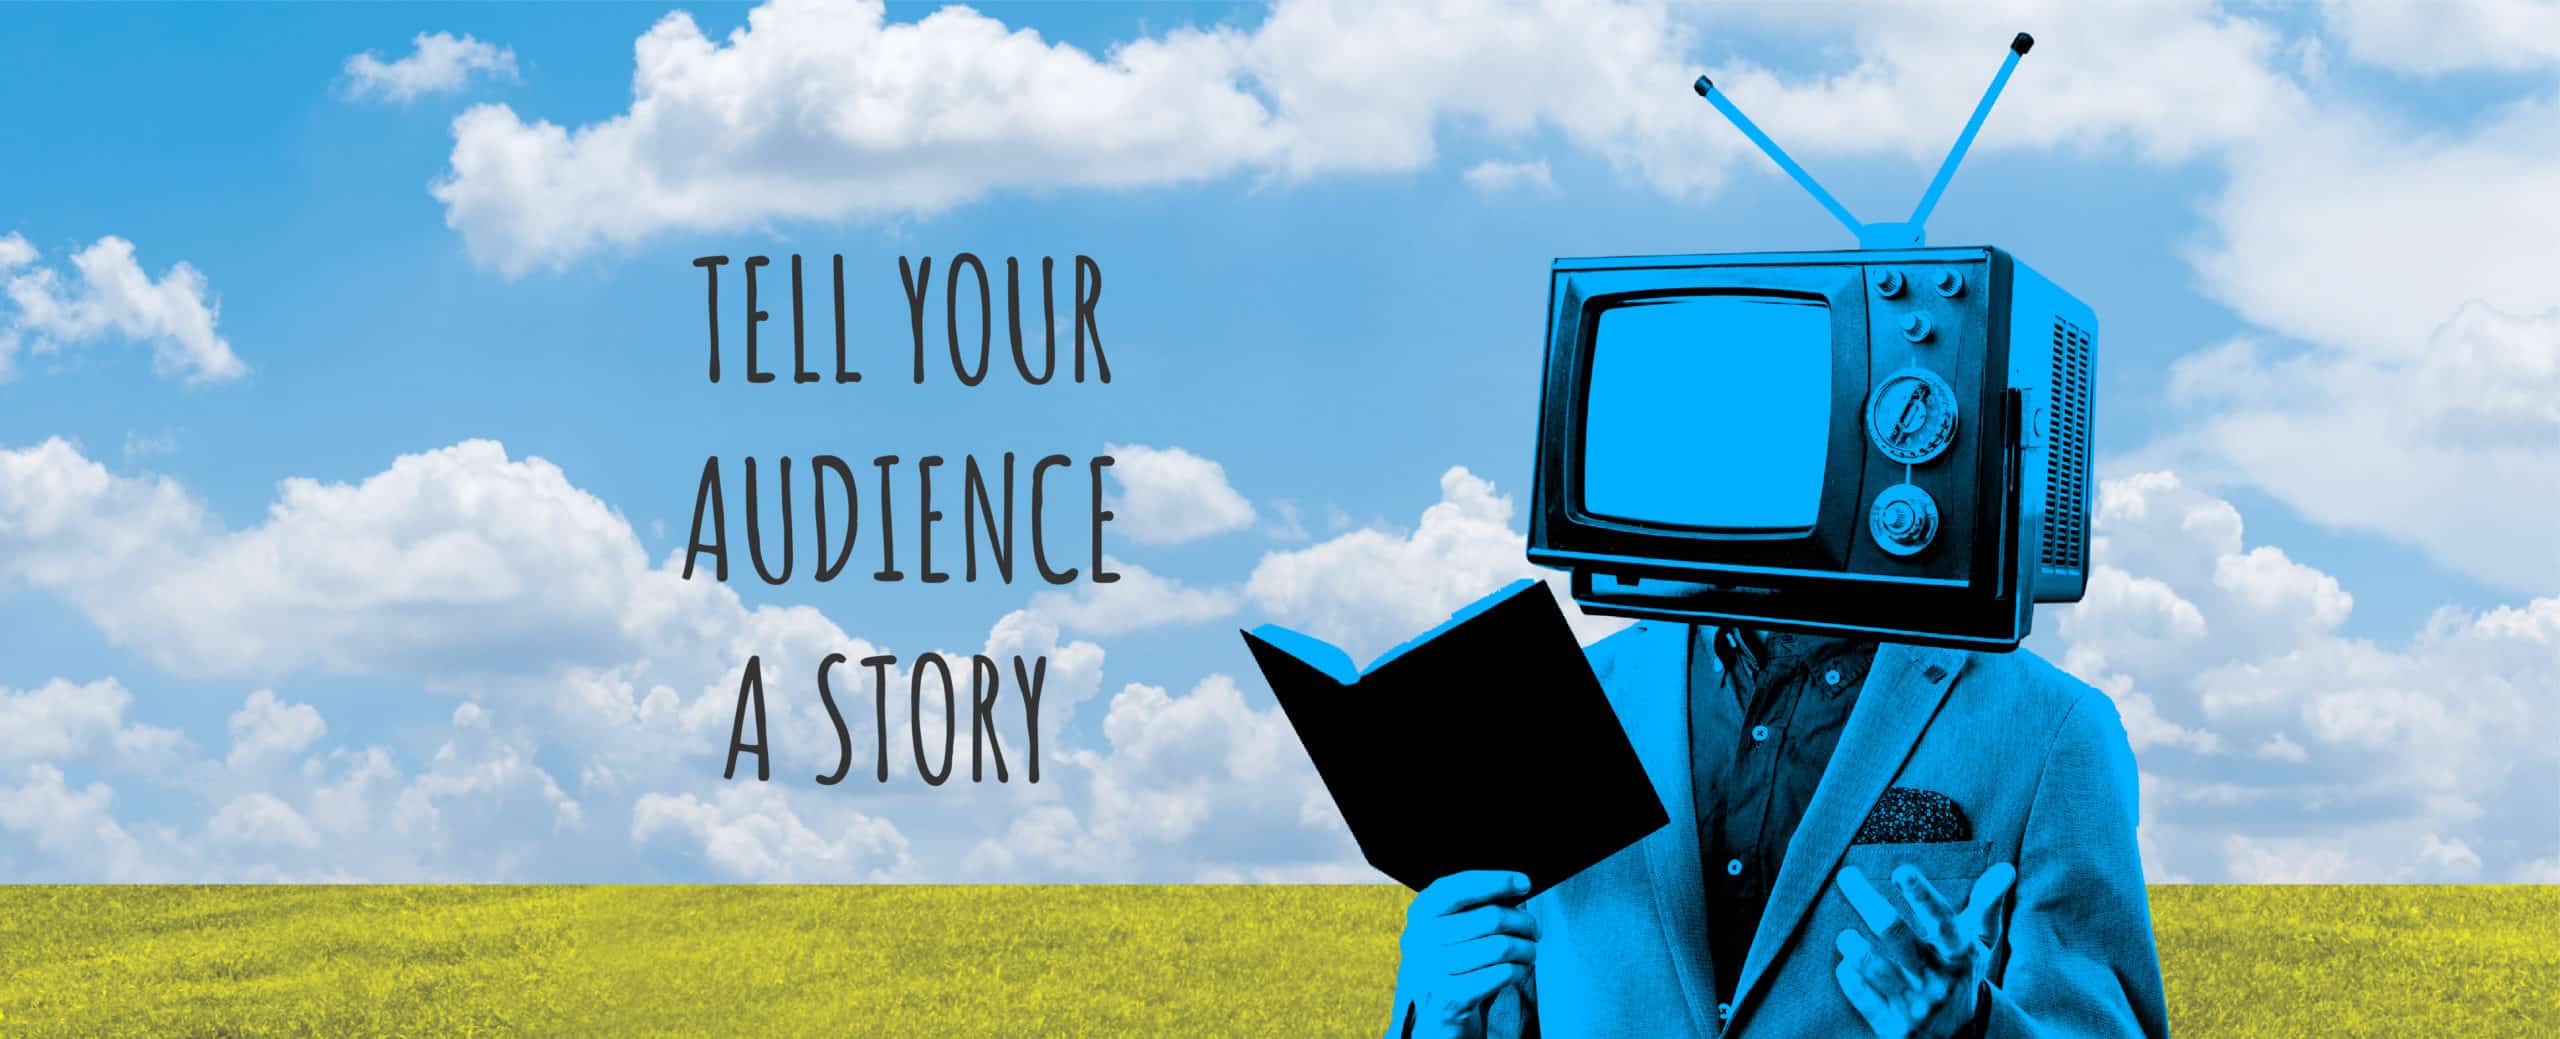 Tell Your Audience a Story